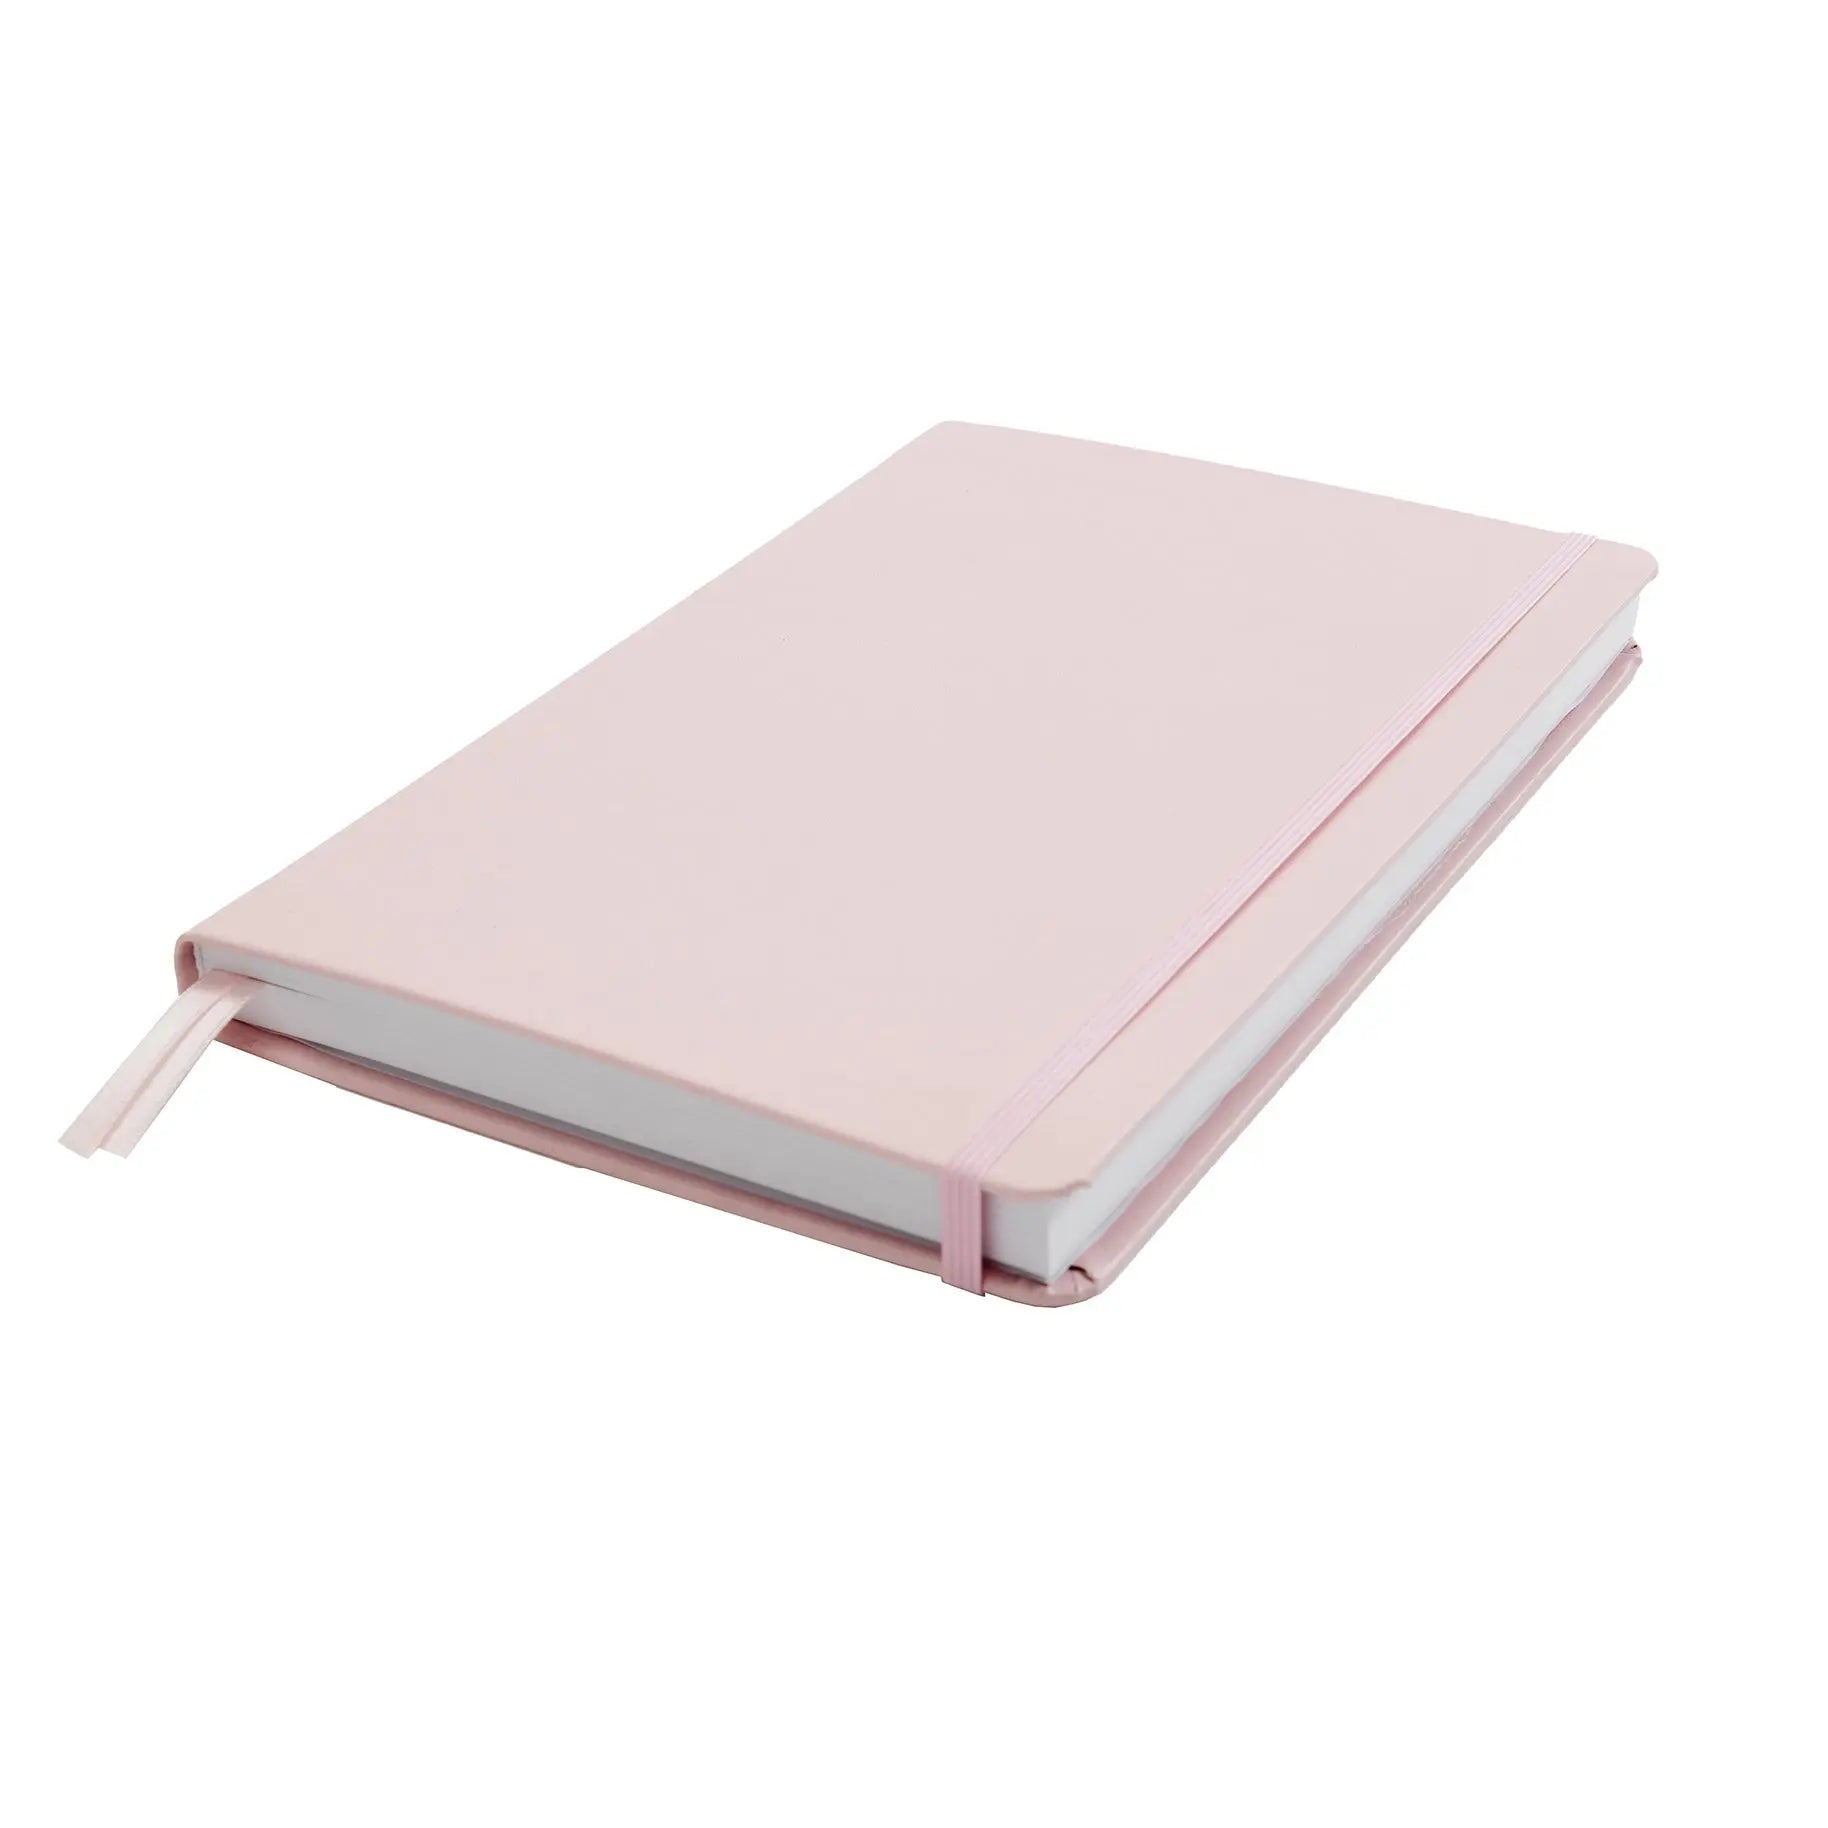 Home Smith Hardcover Vegan Leather Journal in Blush Home Smith